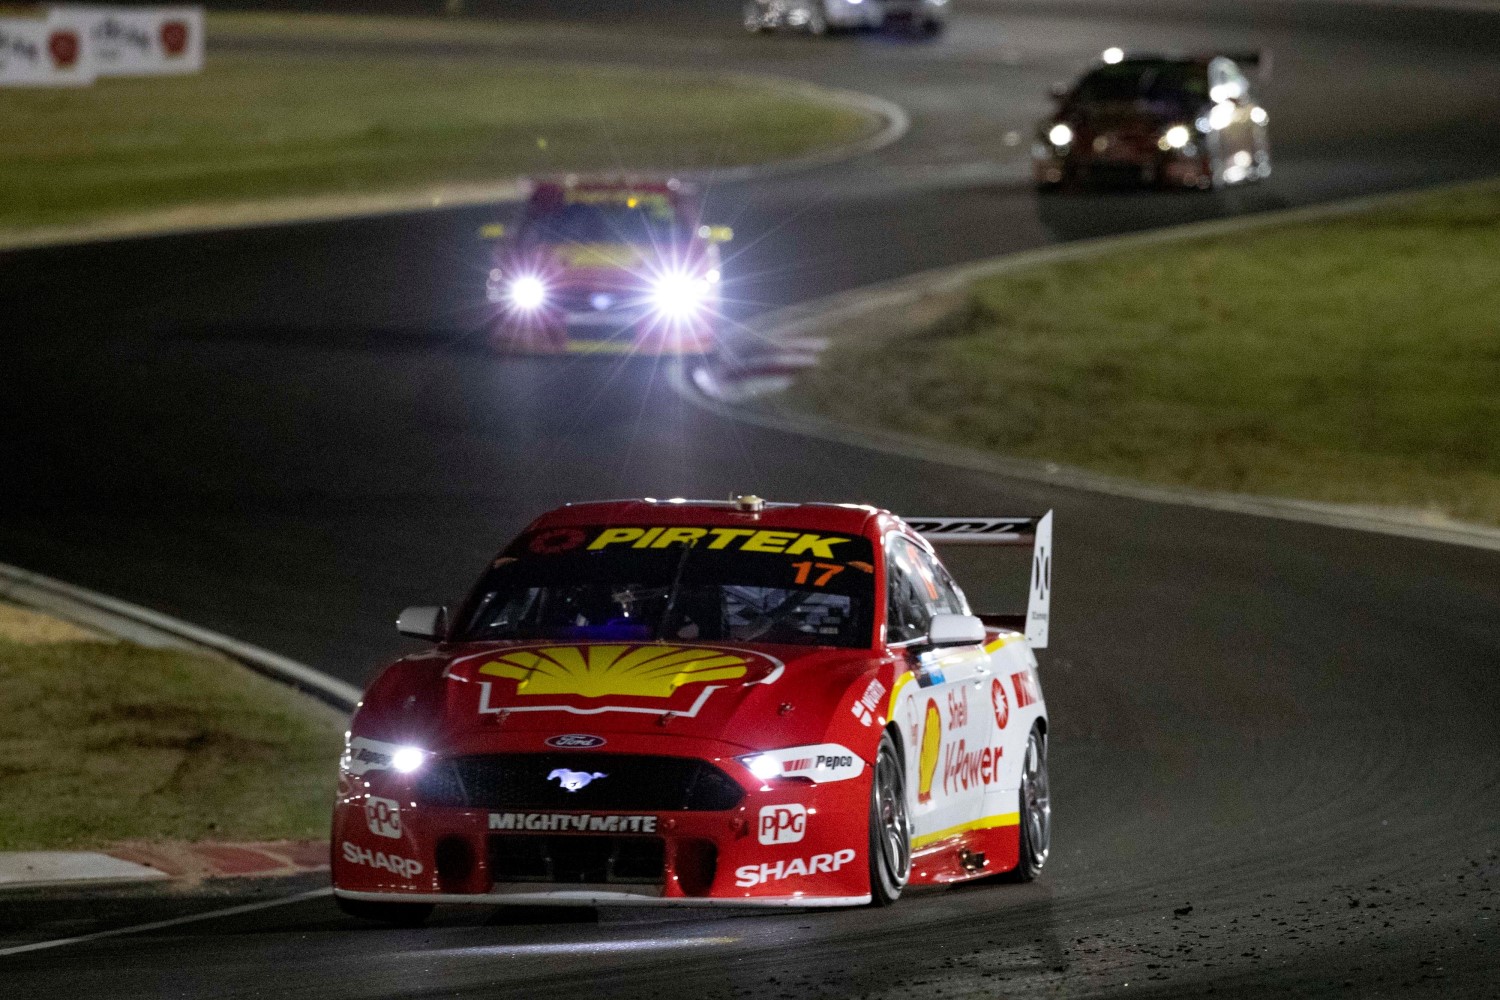 Penske Mustang drivers McLaughlin and Coulthard